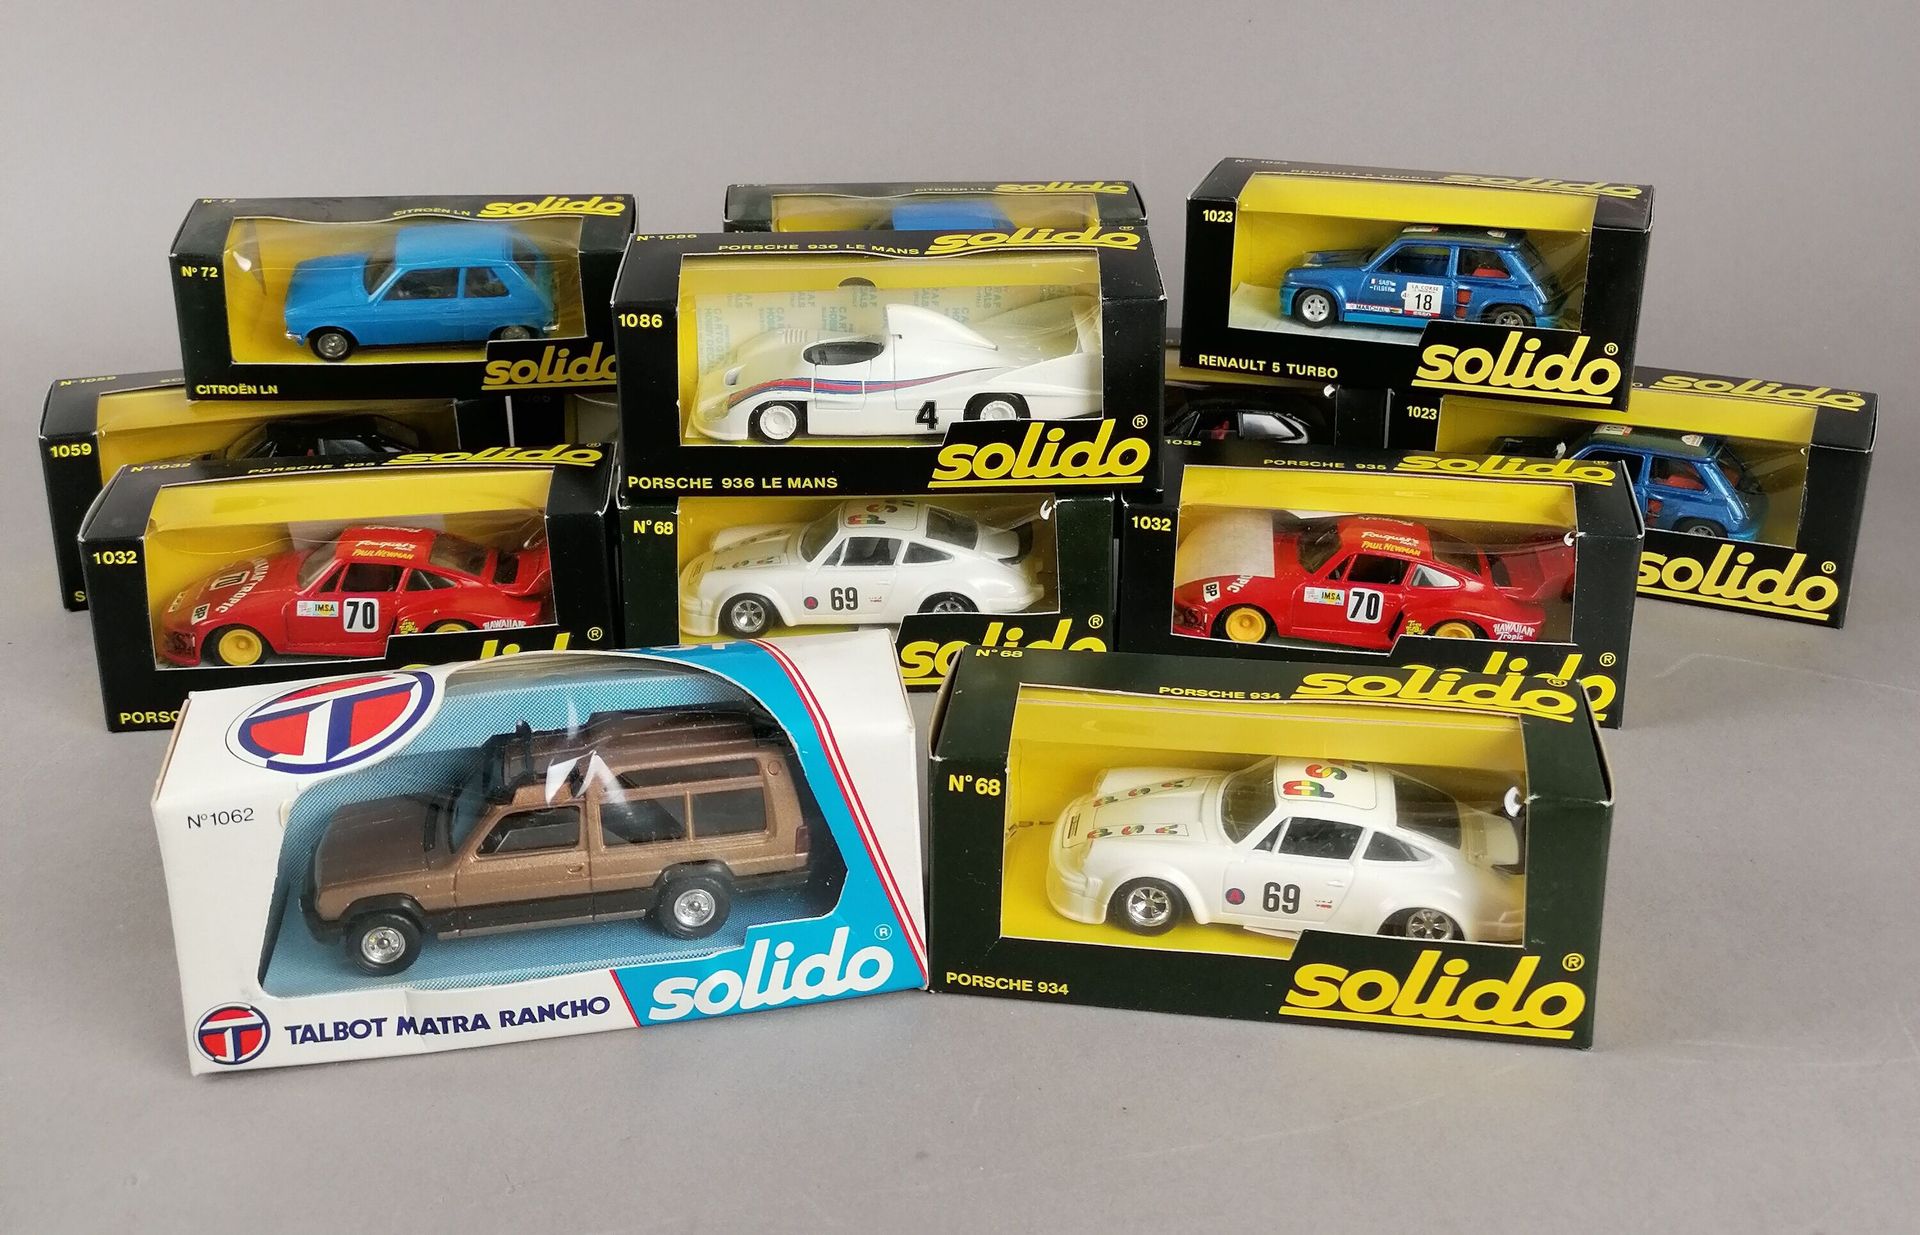 Null SOLIDO - 22 vehicles, scale 1/43 in their original boxes:

2x Jaguar XJ 12 &hellip;